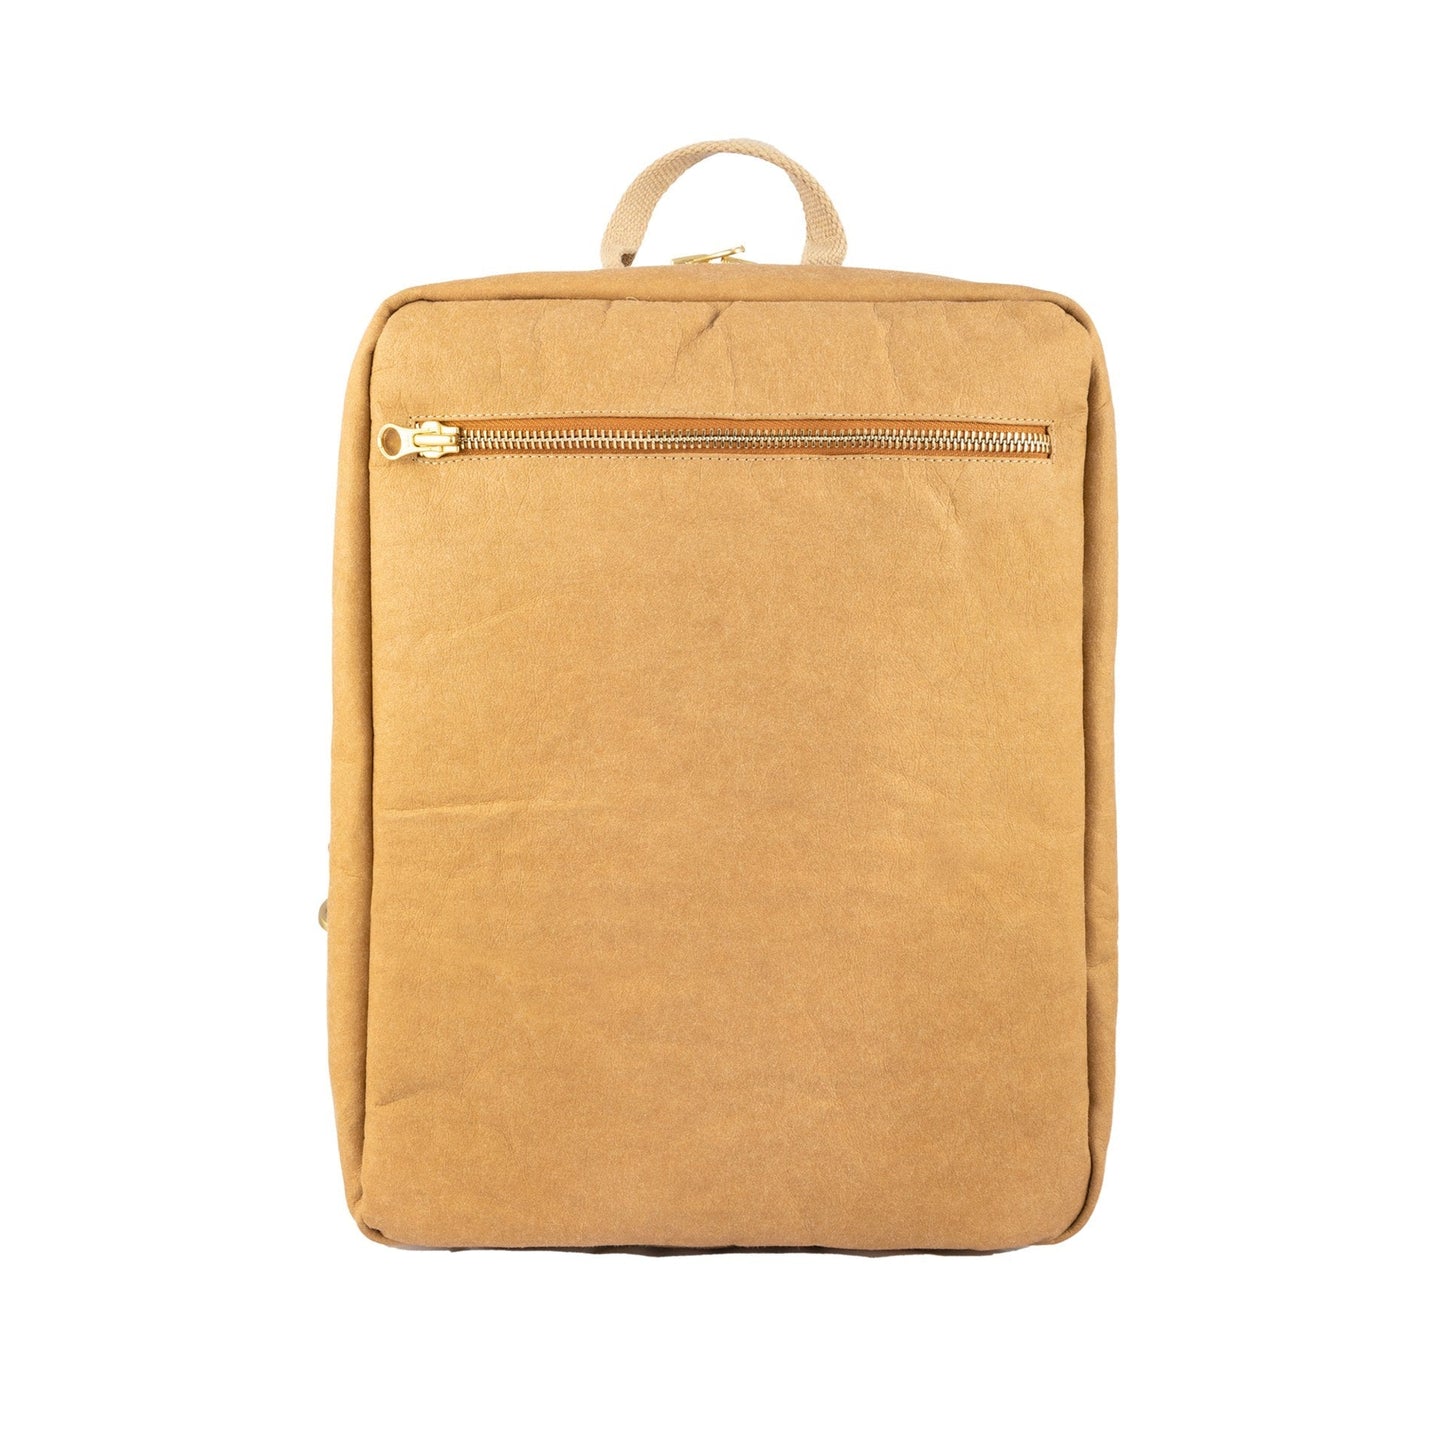 A square washable paper backpack is shown in a light tan colour. it has one external zip pocket and a top handle.